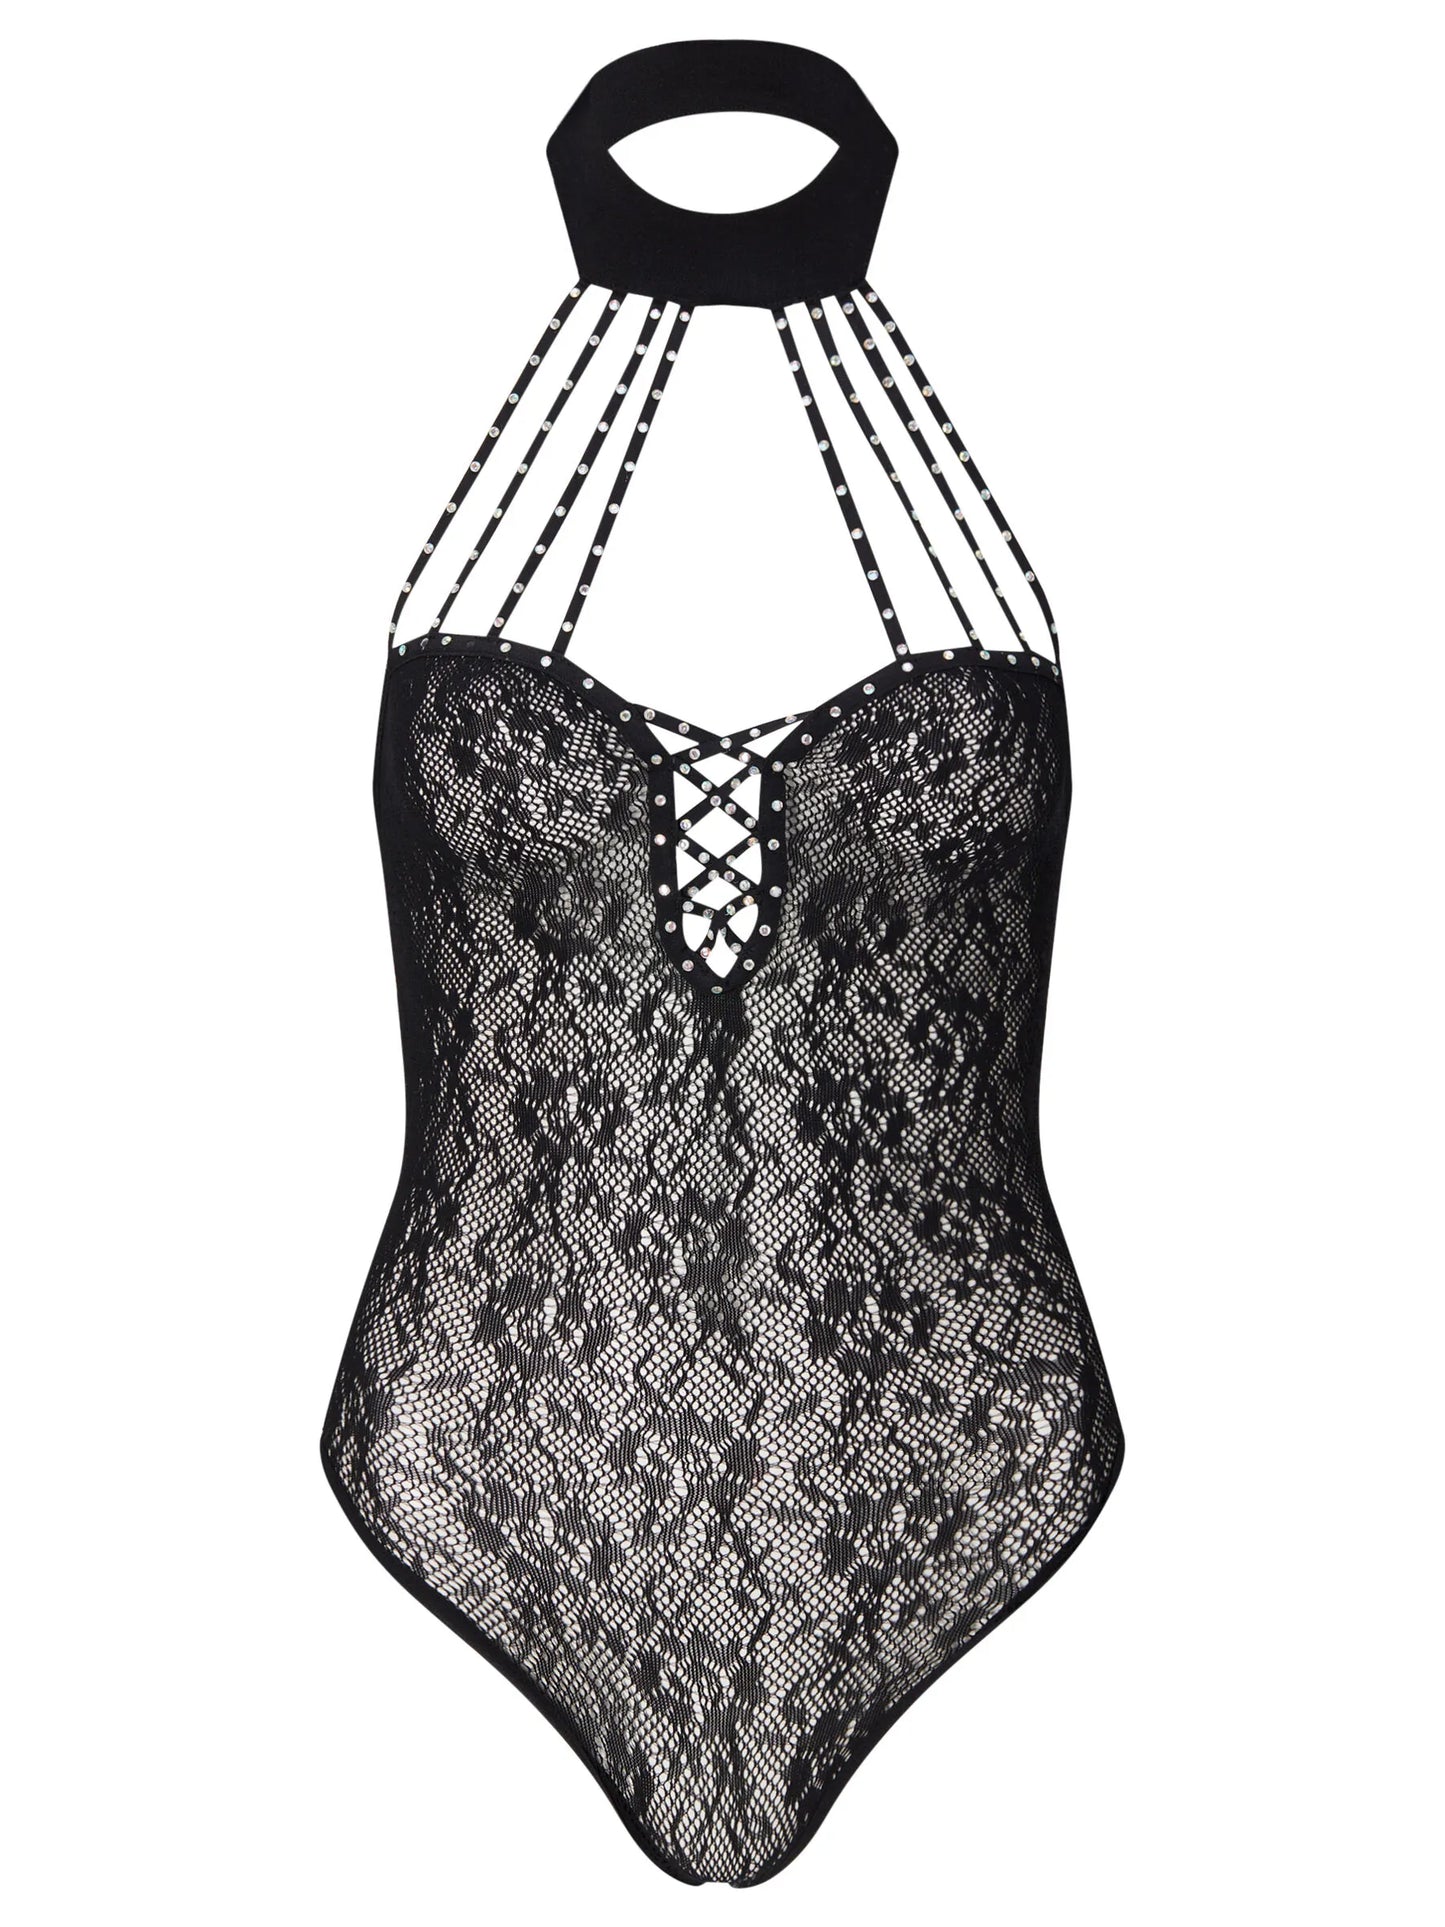 Dynamo Body From Ann Summers Image 04